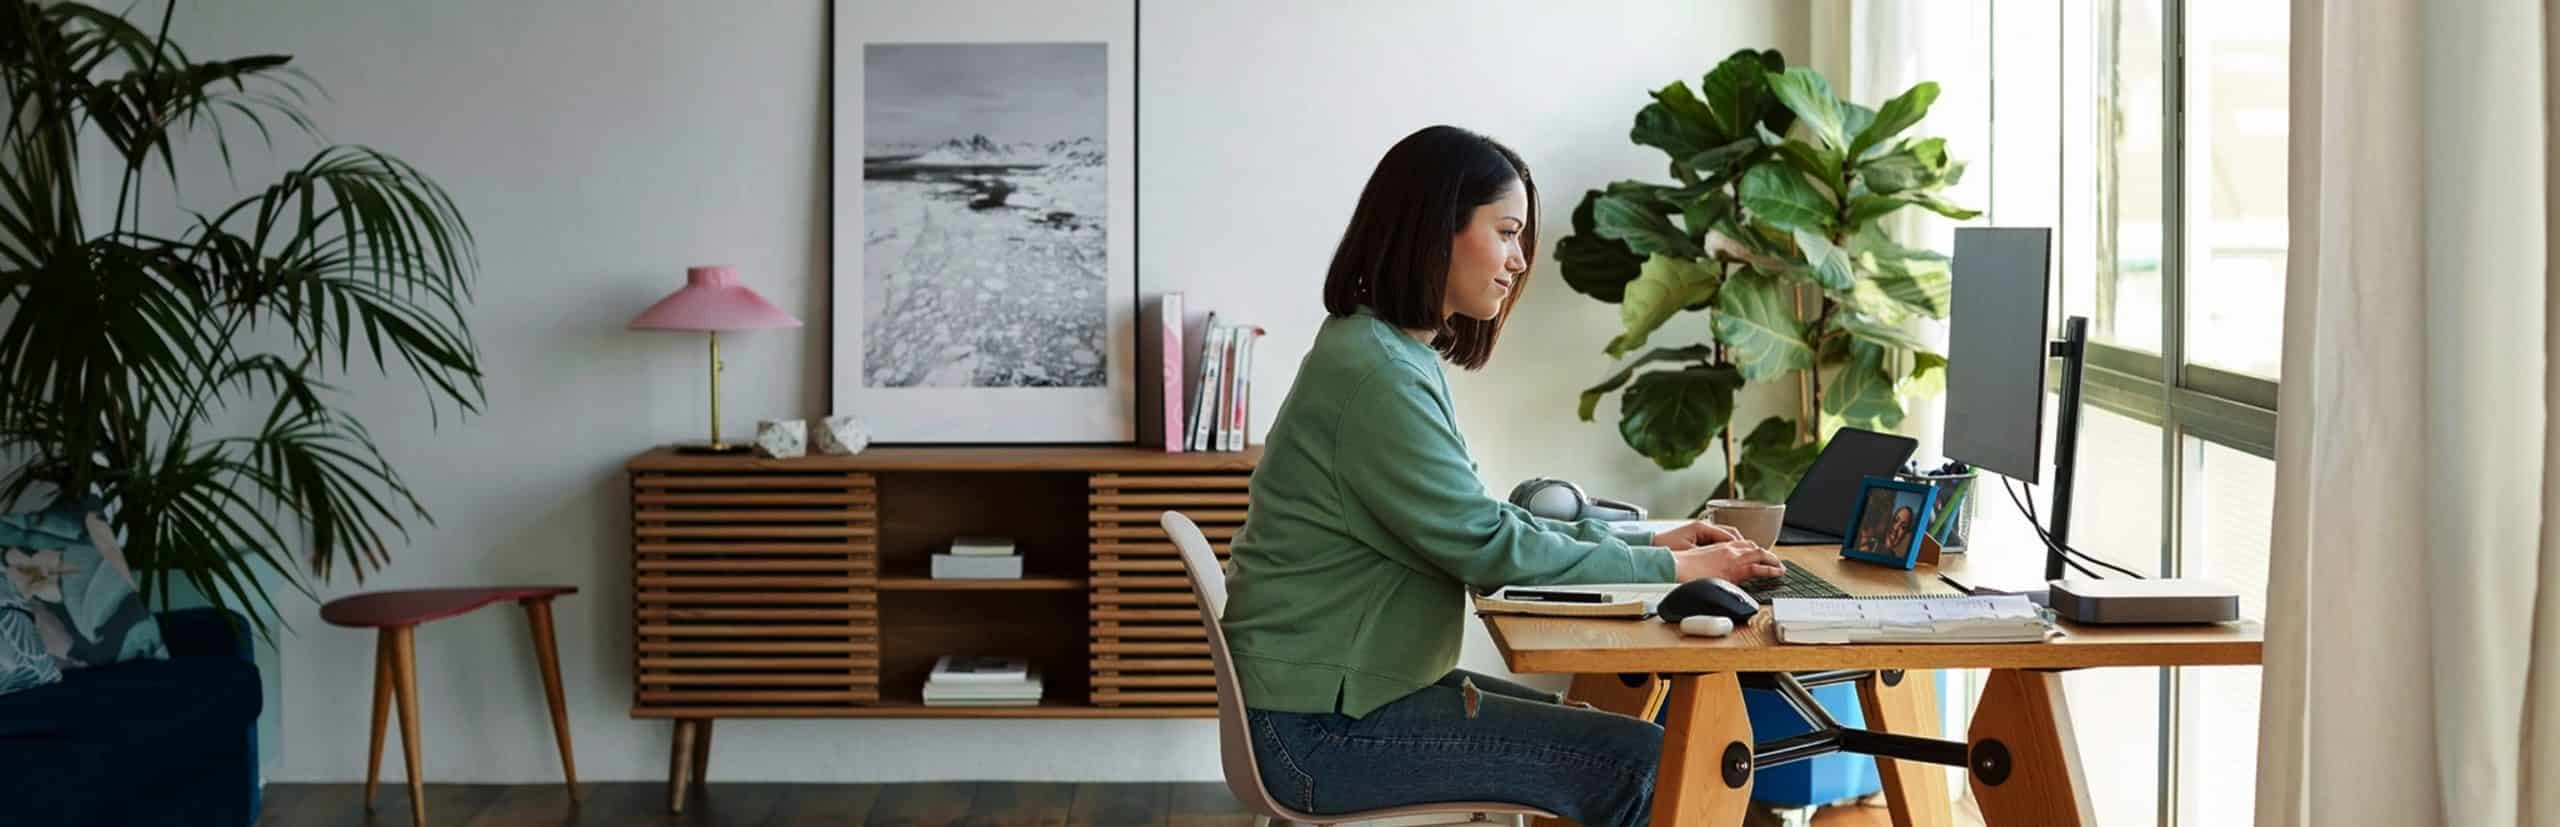 A woman sitting at her desk in front of a window, looking at her computer